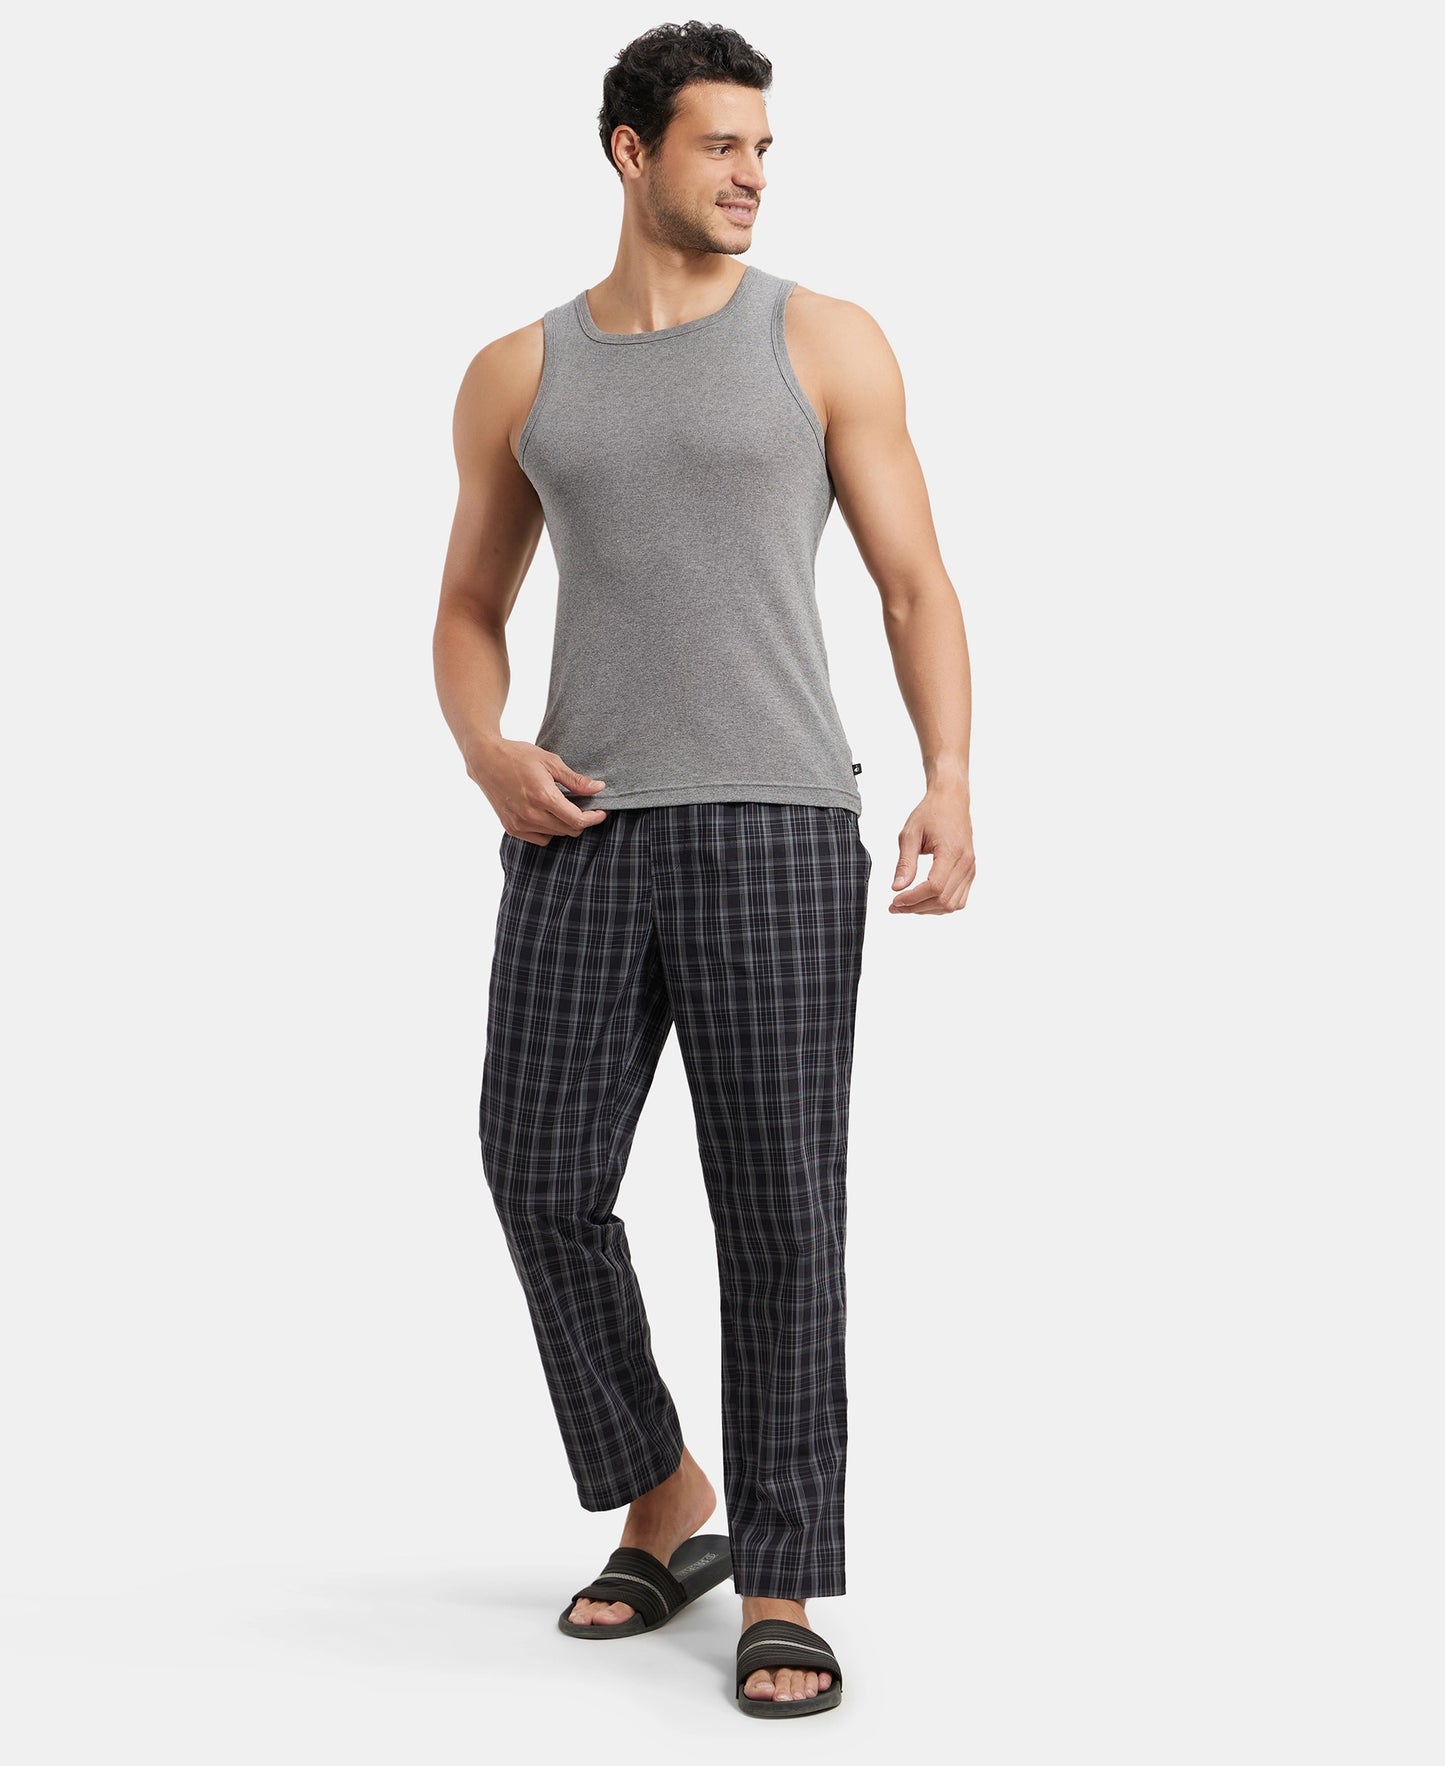 Super Combed Cotton Woven Fabric Regular Fit Checkered Pyjama with Side Pockets - Black